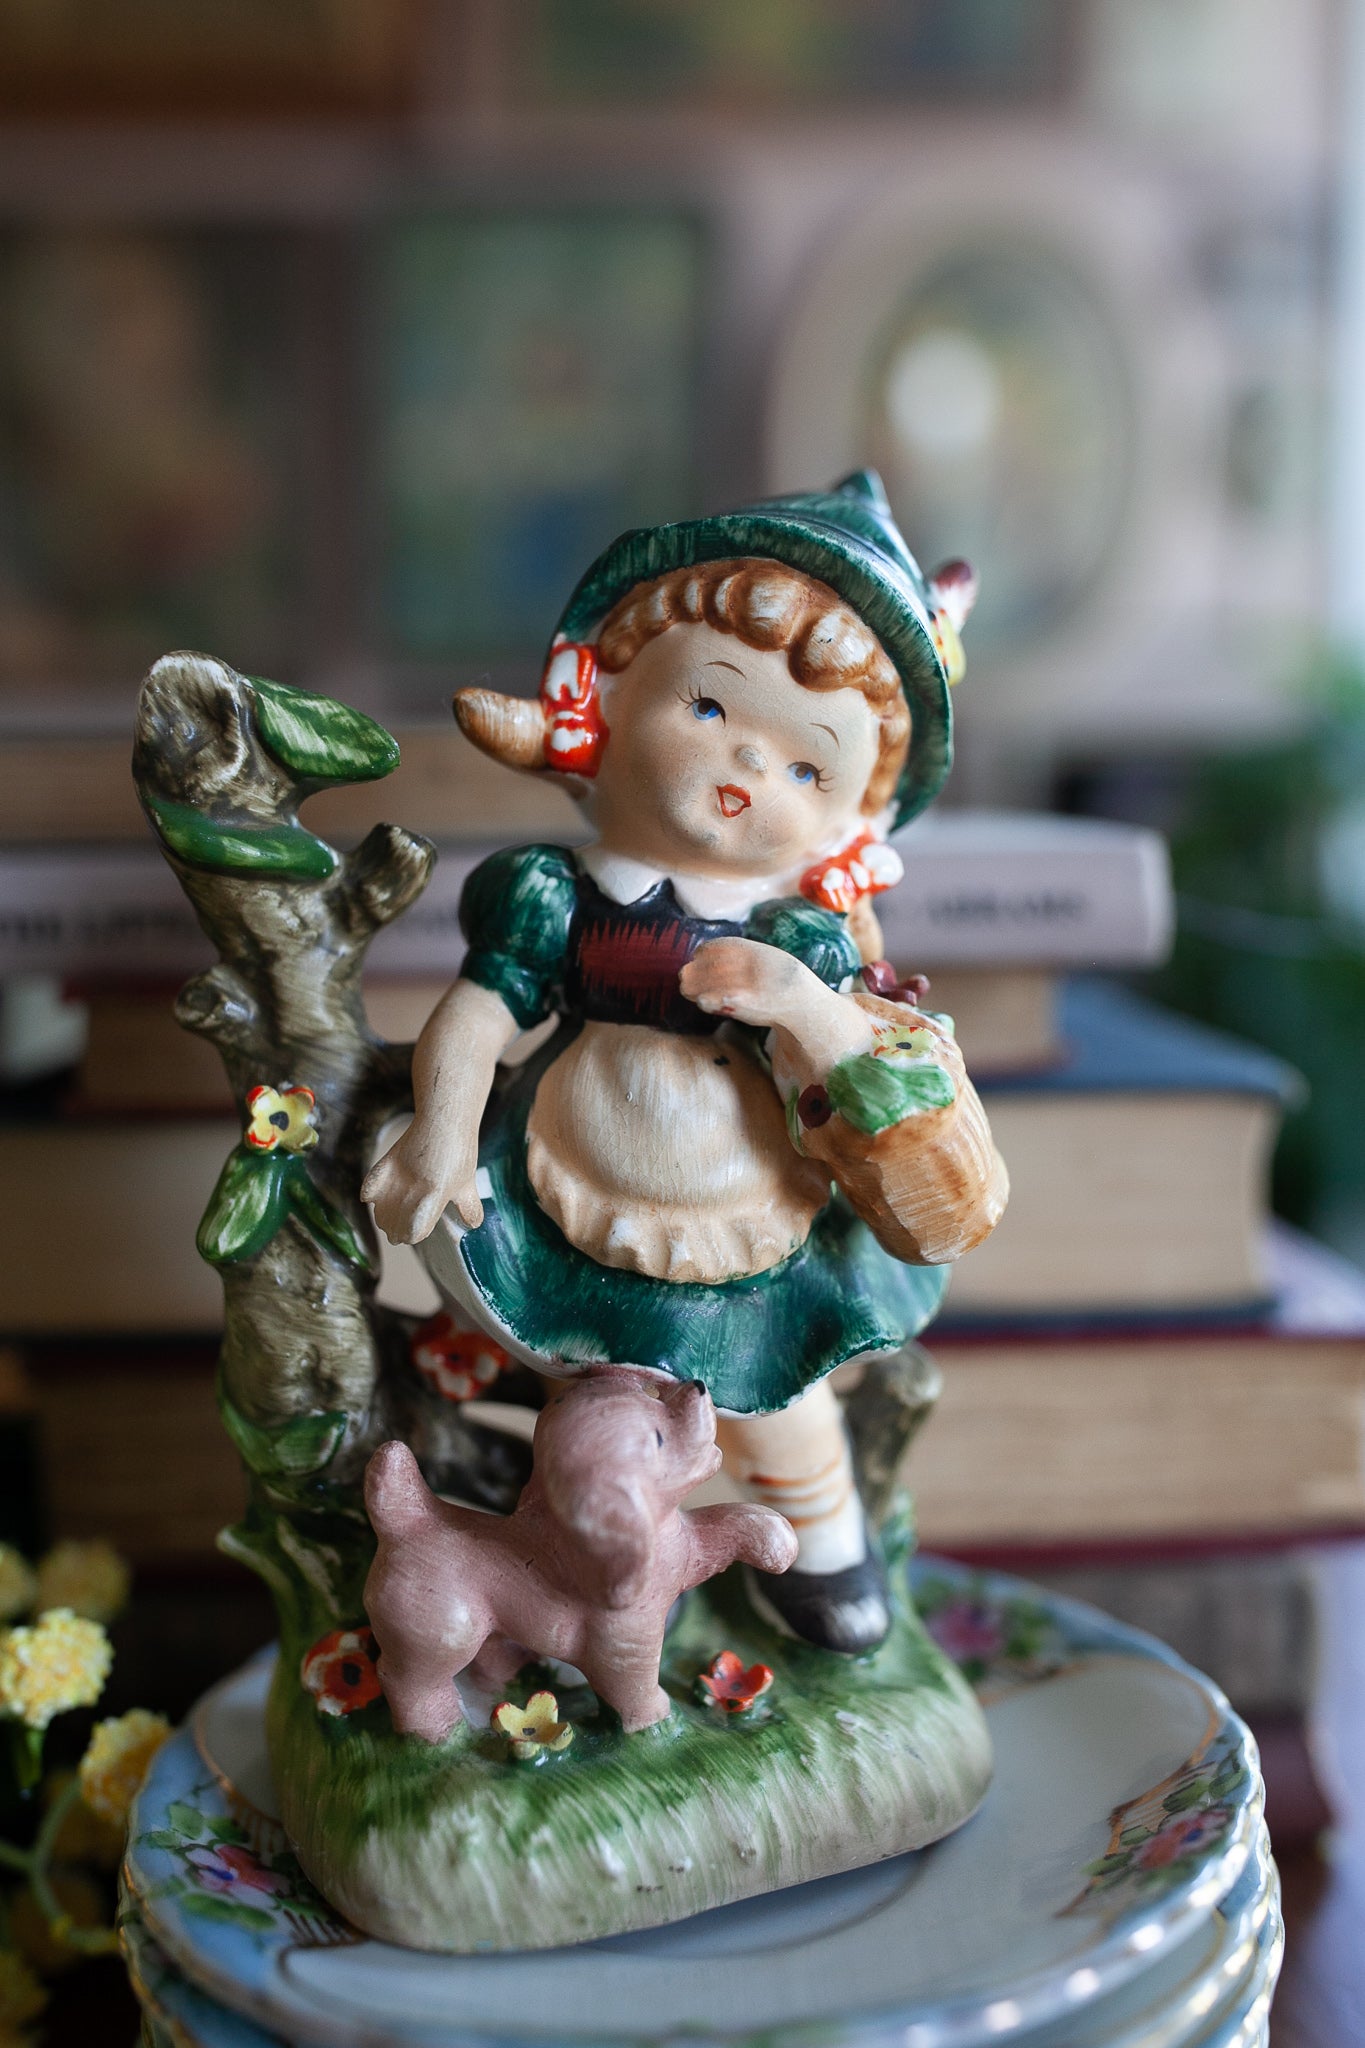 Vintage Porcelain Figurine - Girl with flowers and puppy